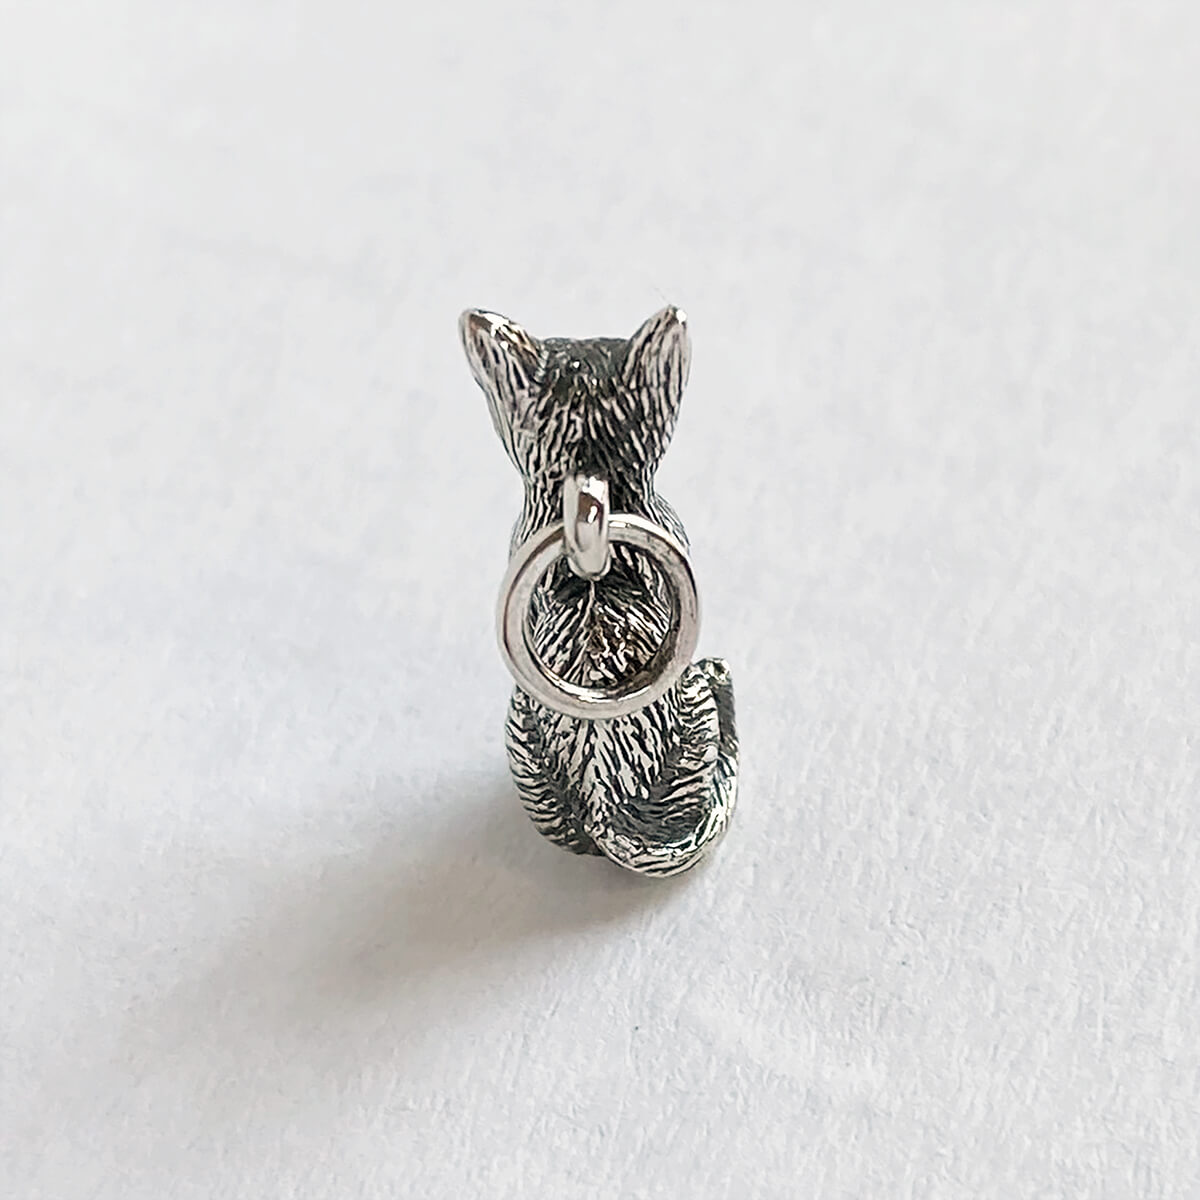 Realistically detailed sterling silver sitting cat charm from Charmarama charms